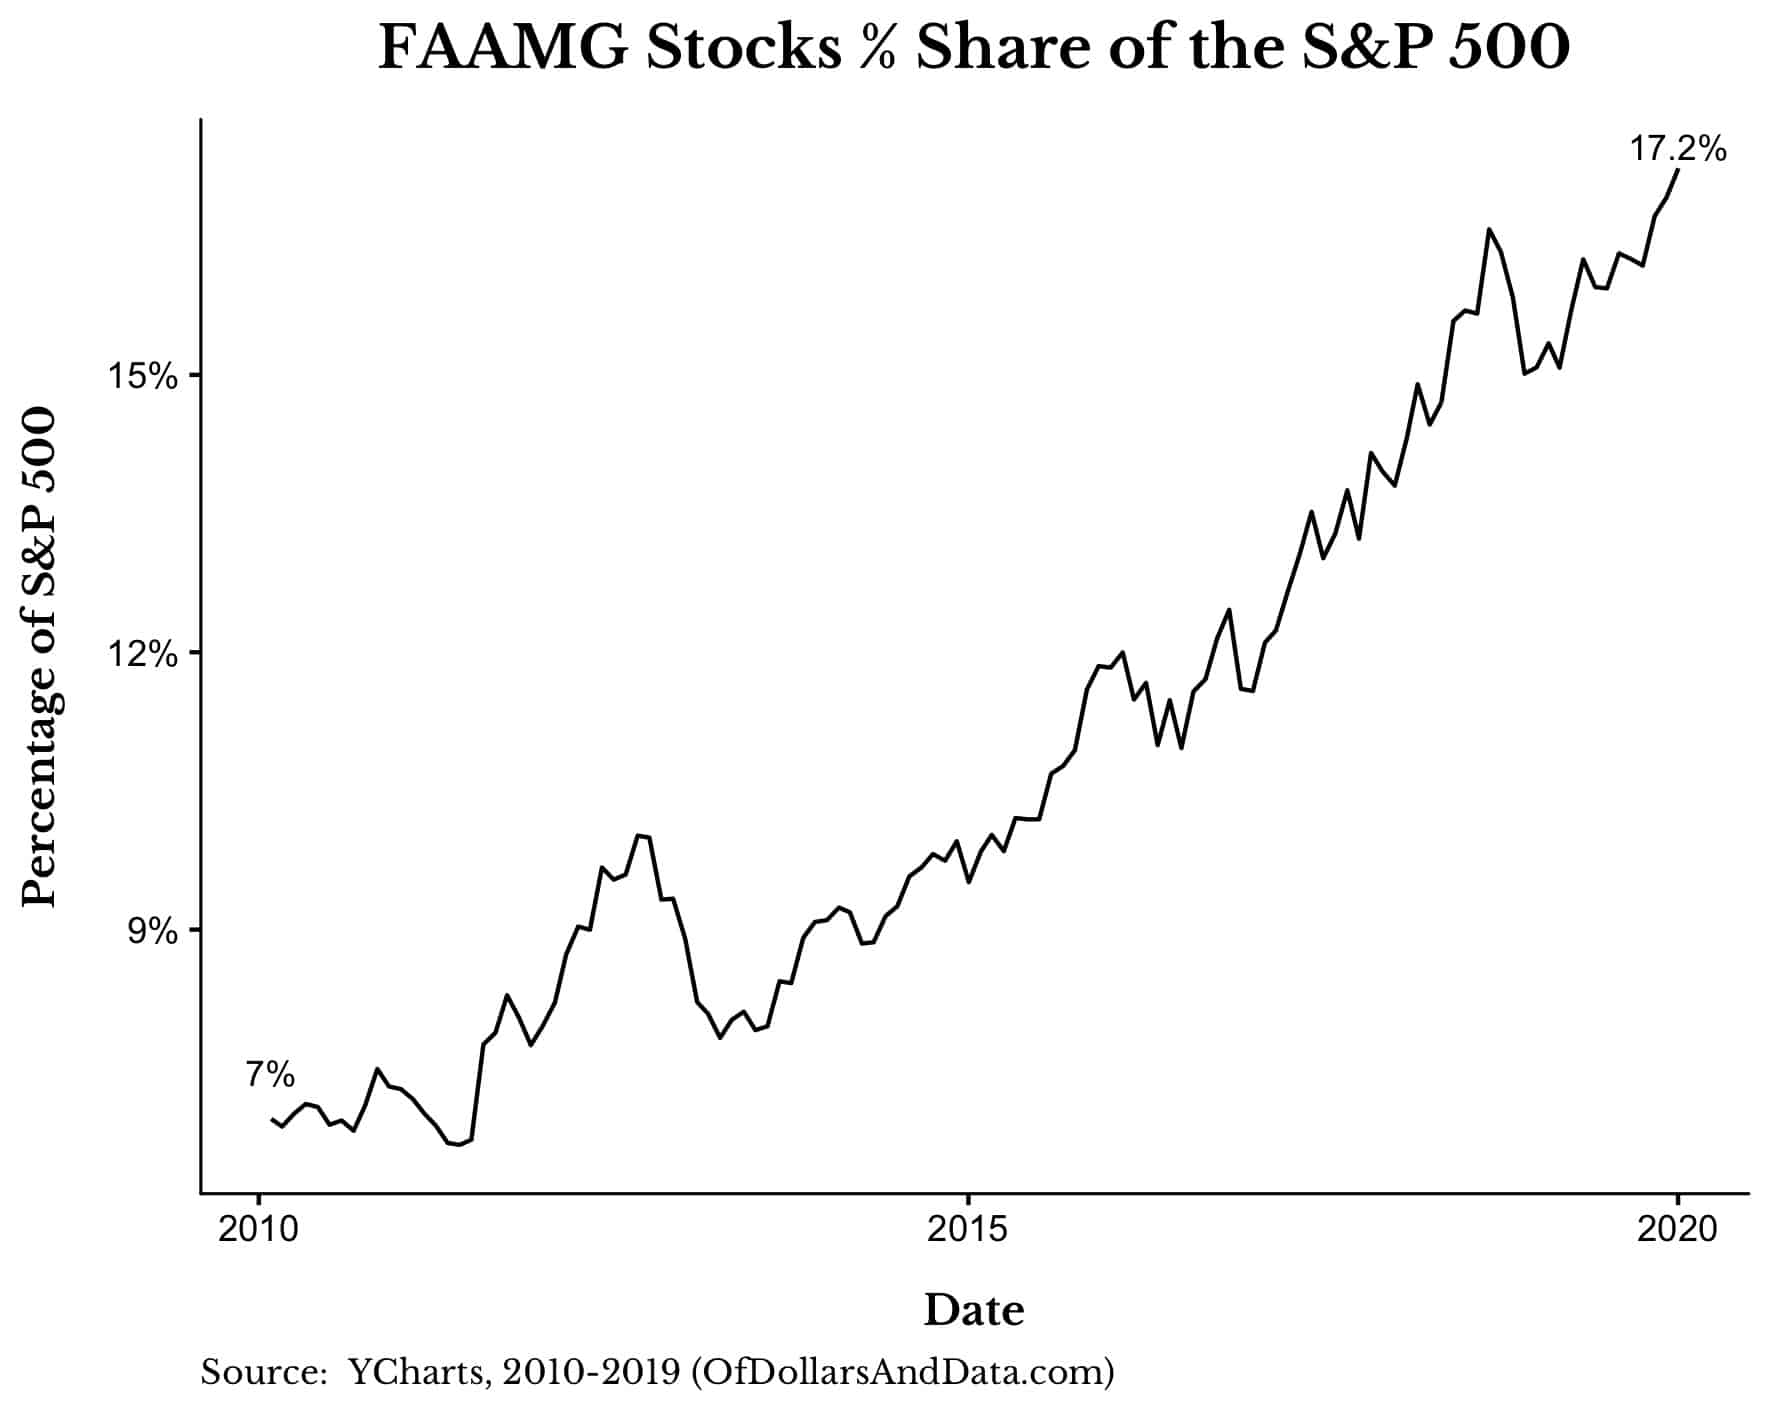 FAAMG stocks % share of the S&P 500 from 2010 to 2020